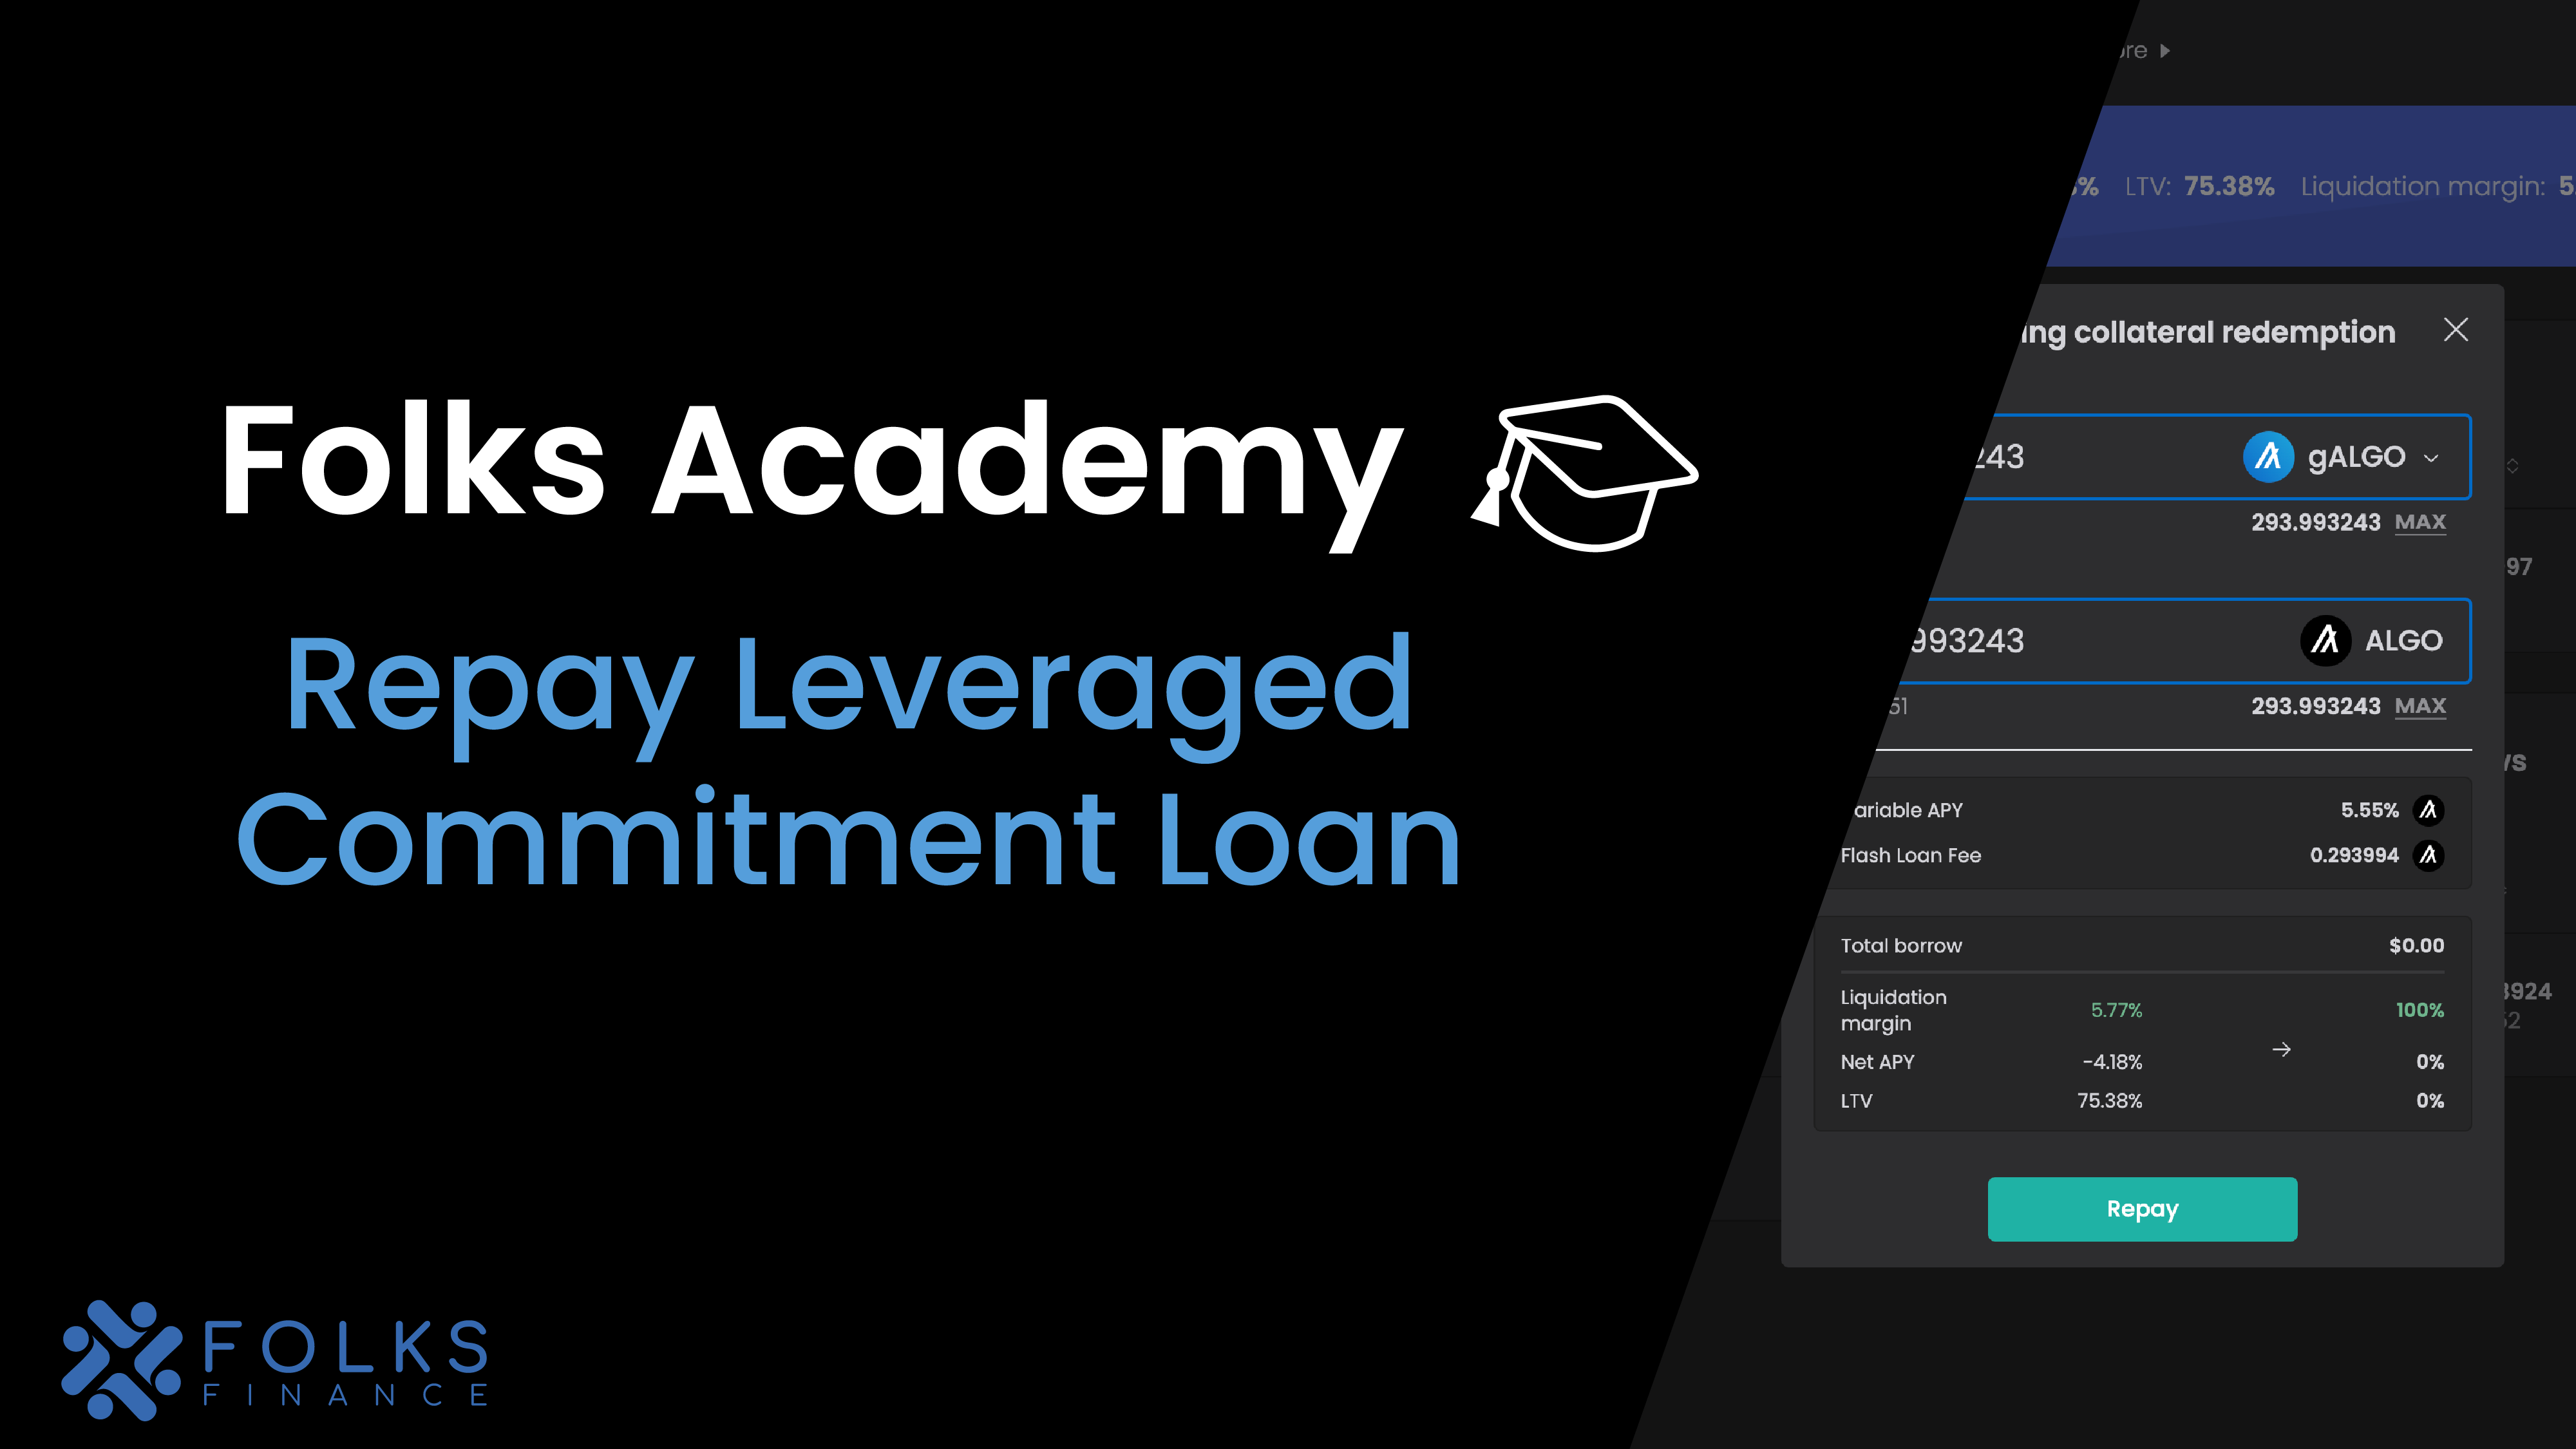 Repay Leveraged Commitment Loan